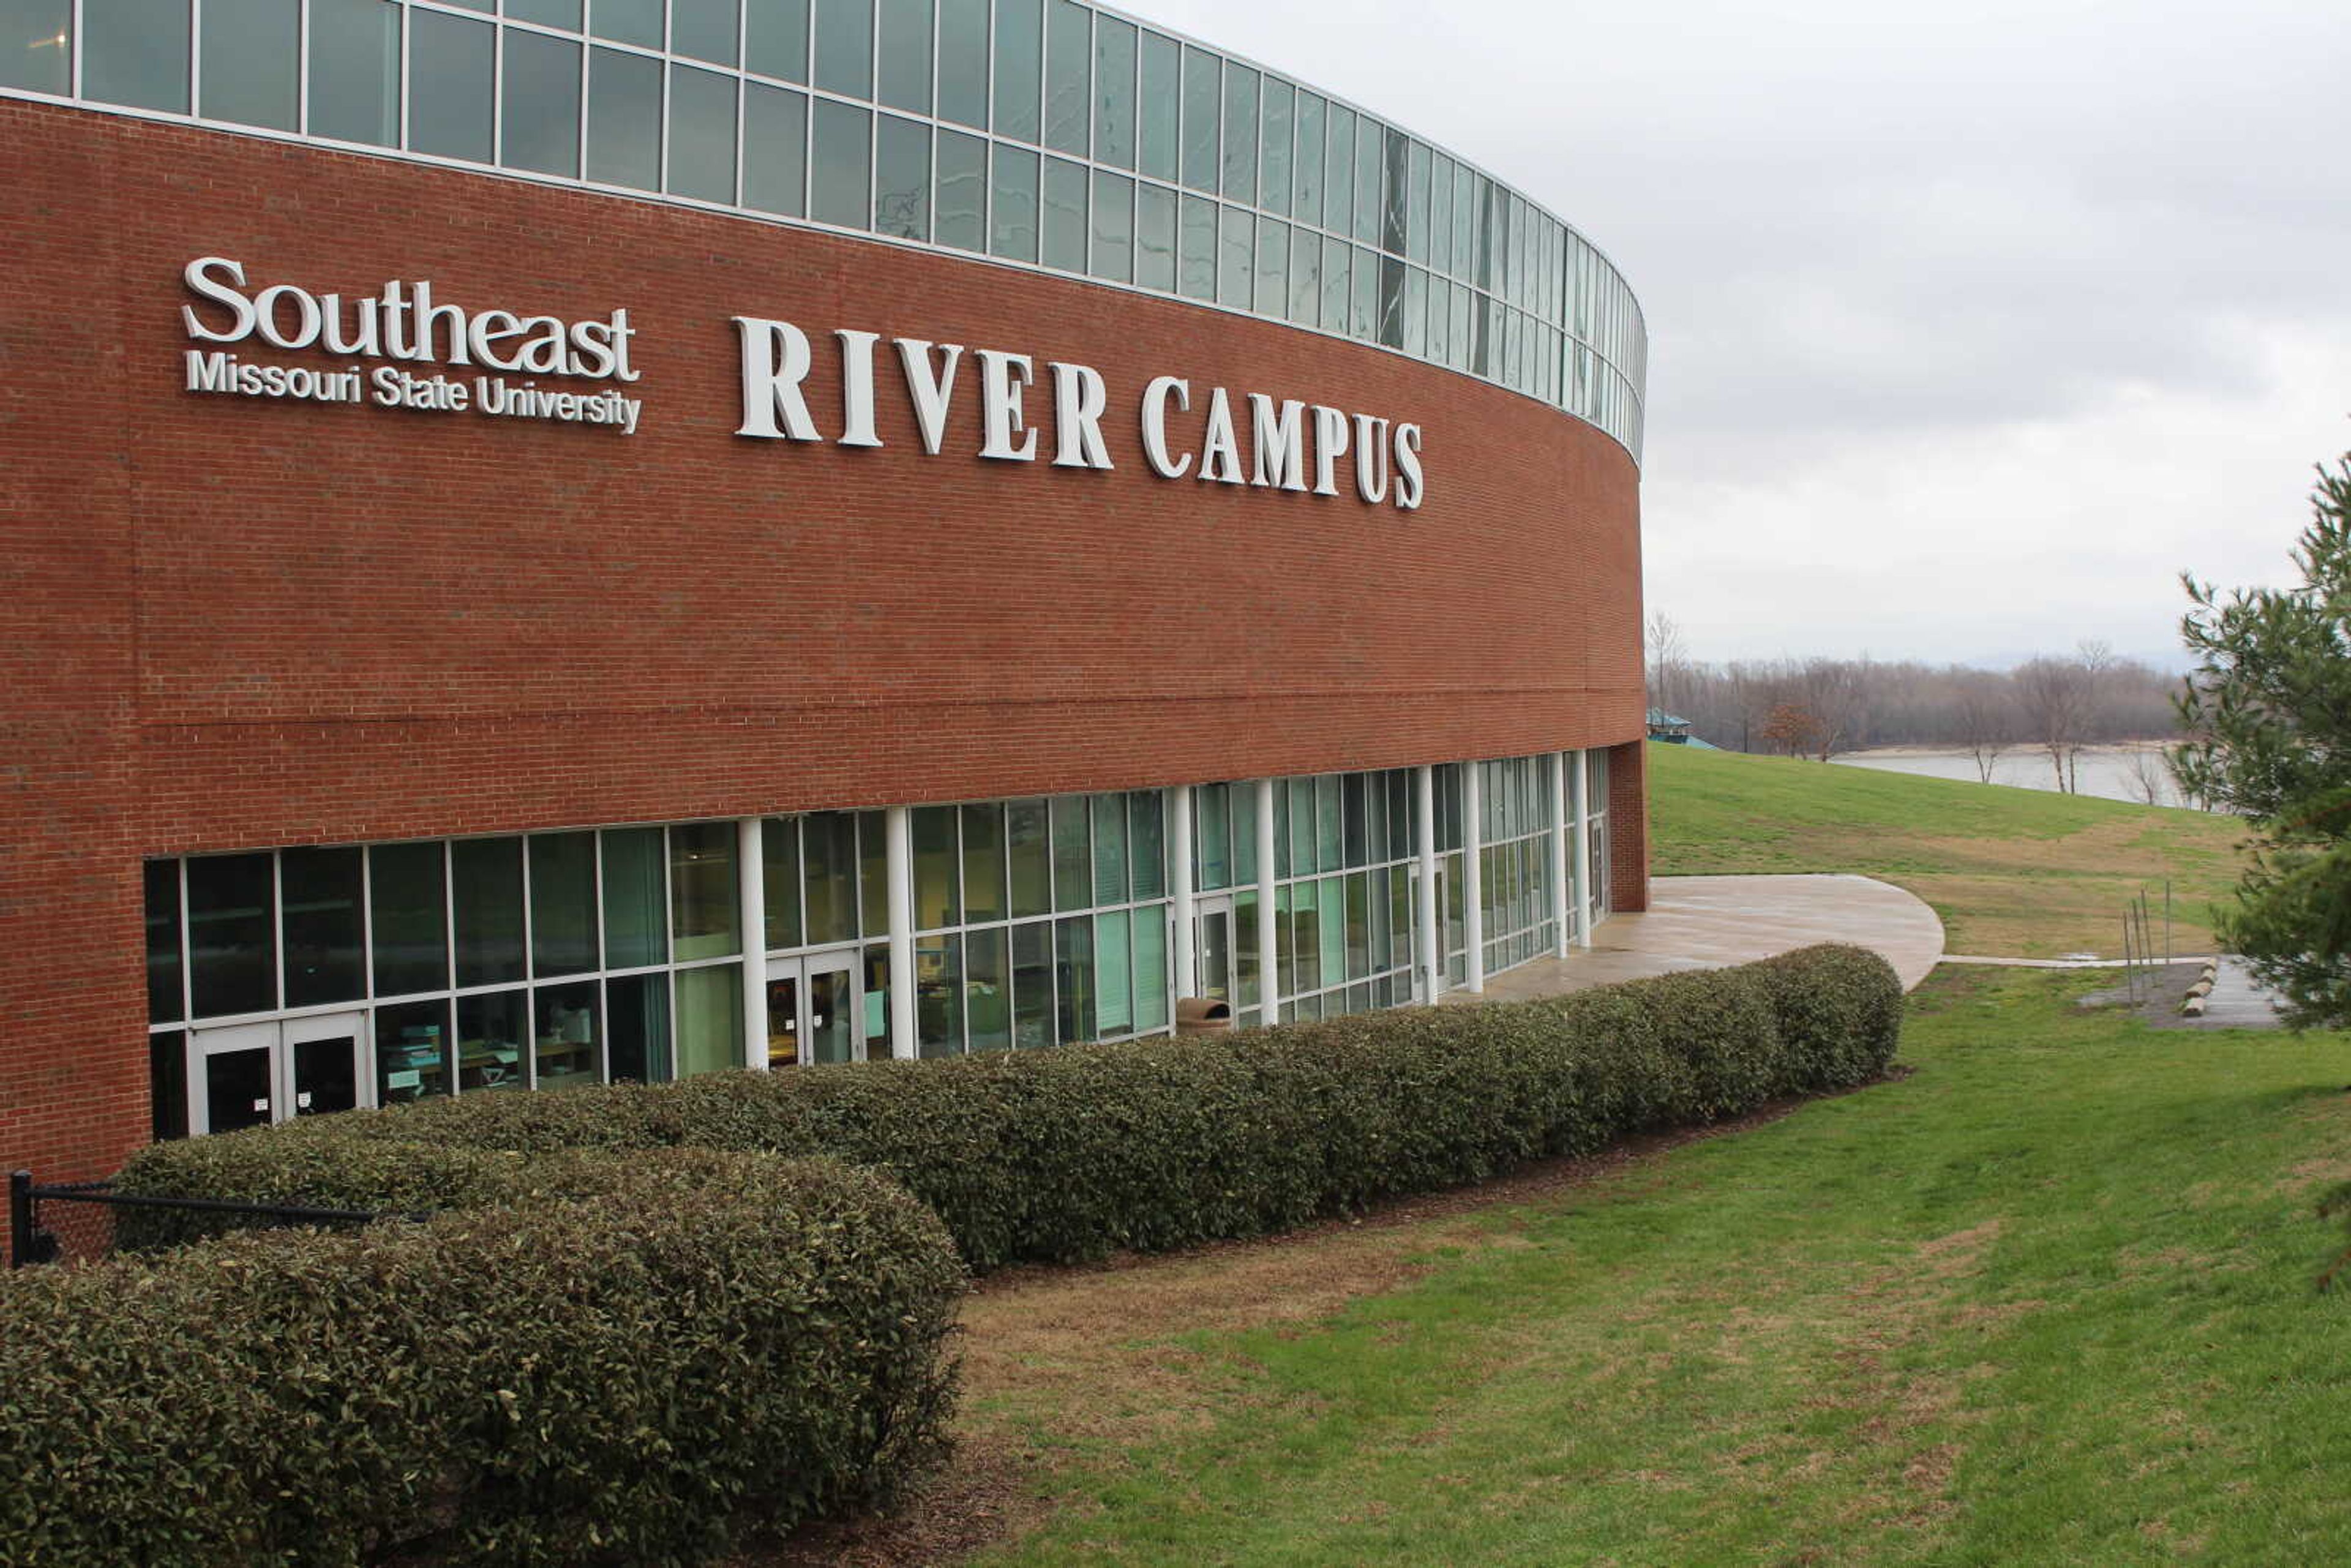 On March 7, 2017, River Campus will celebrate its 10 year anniversary.